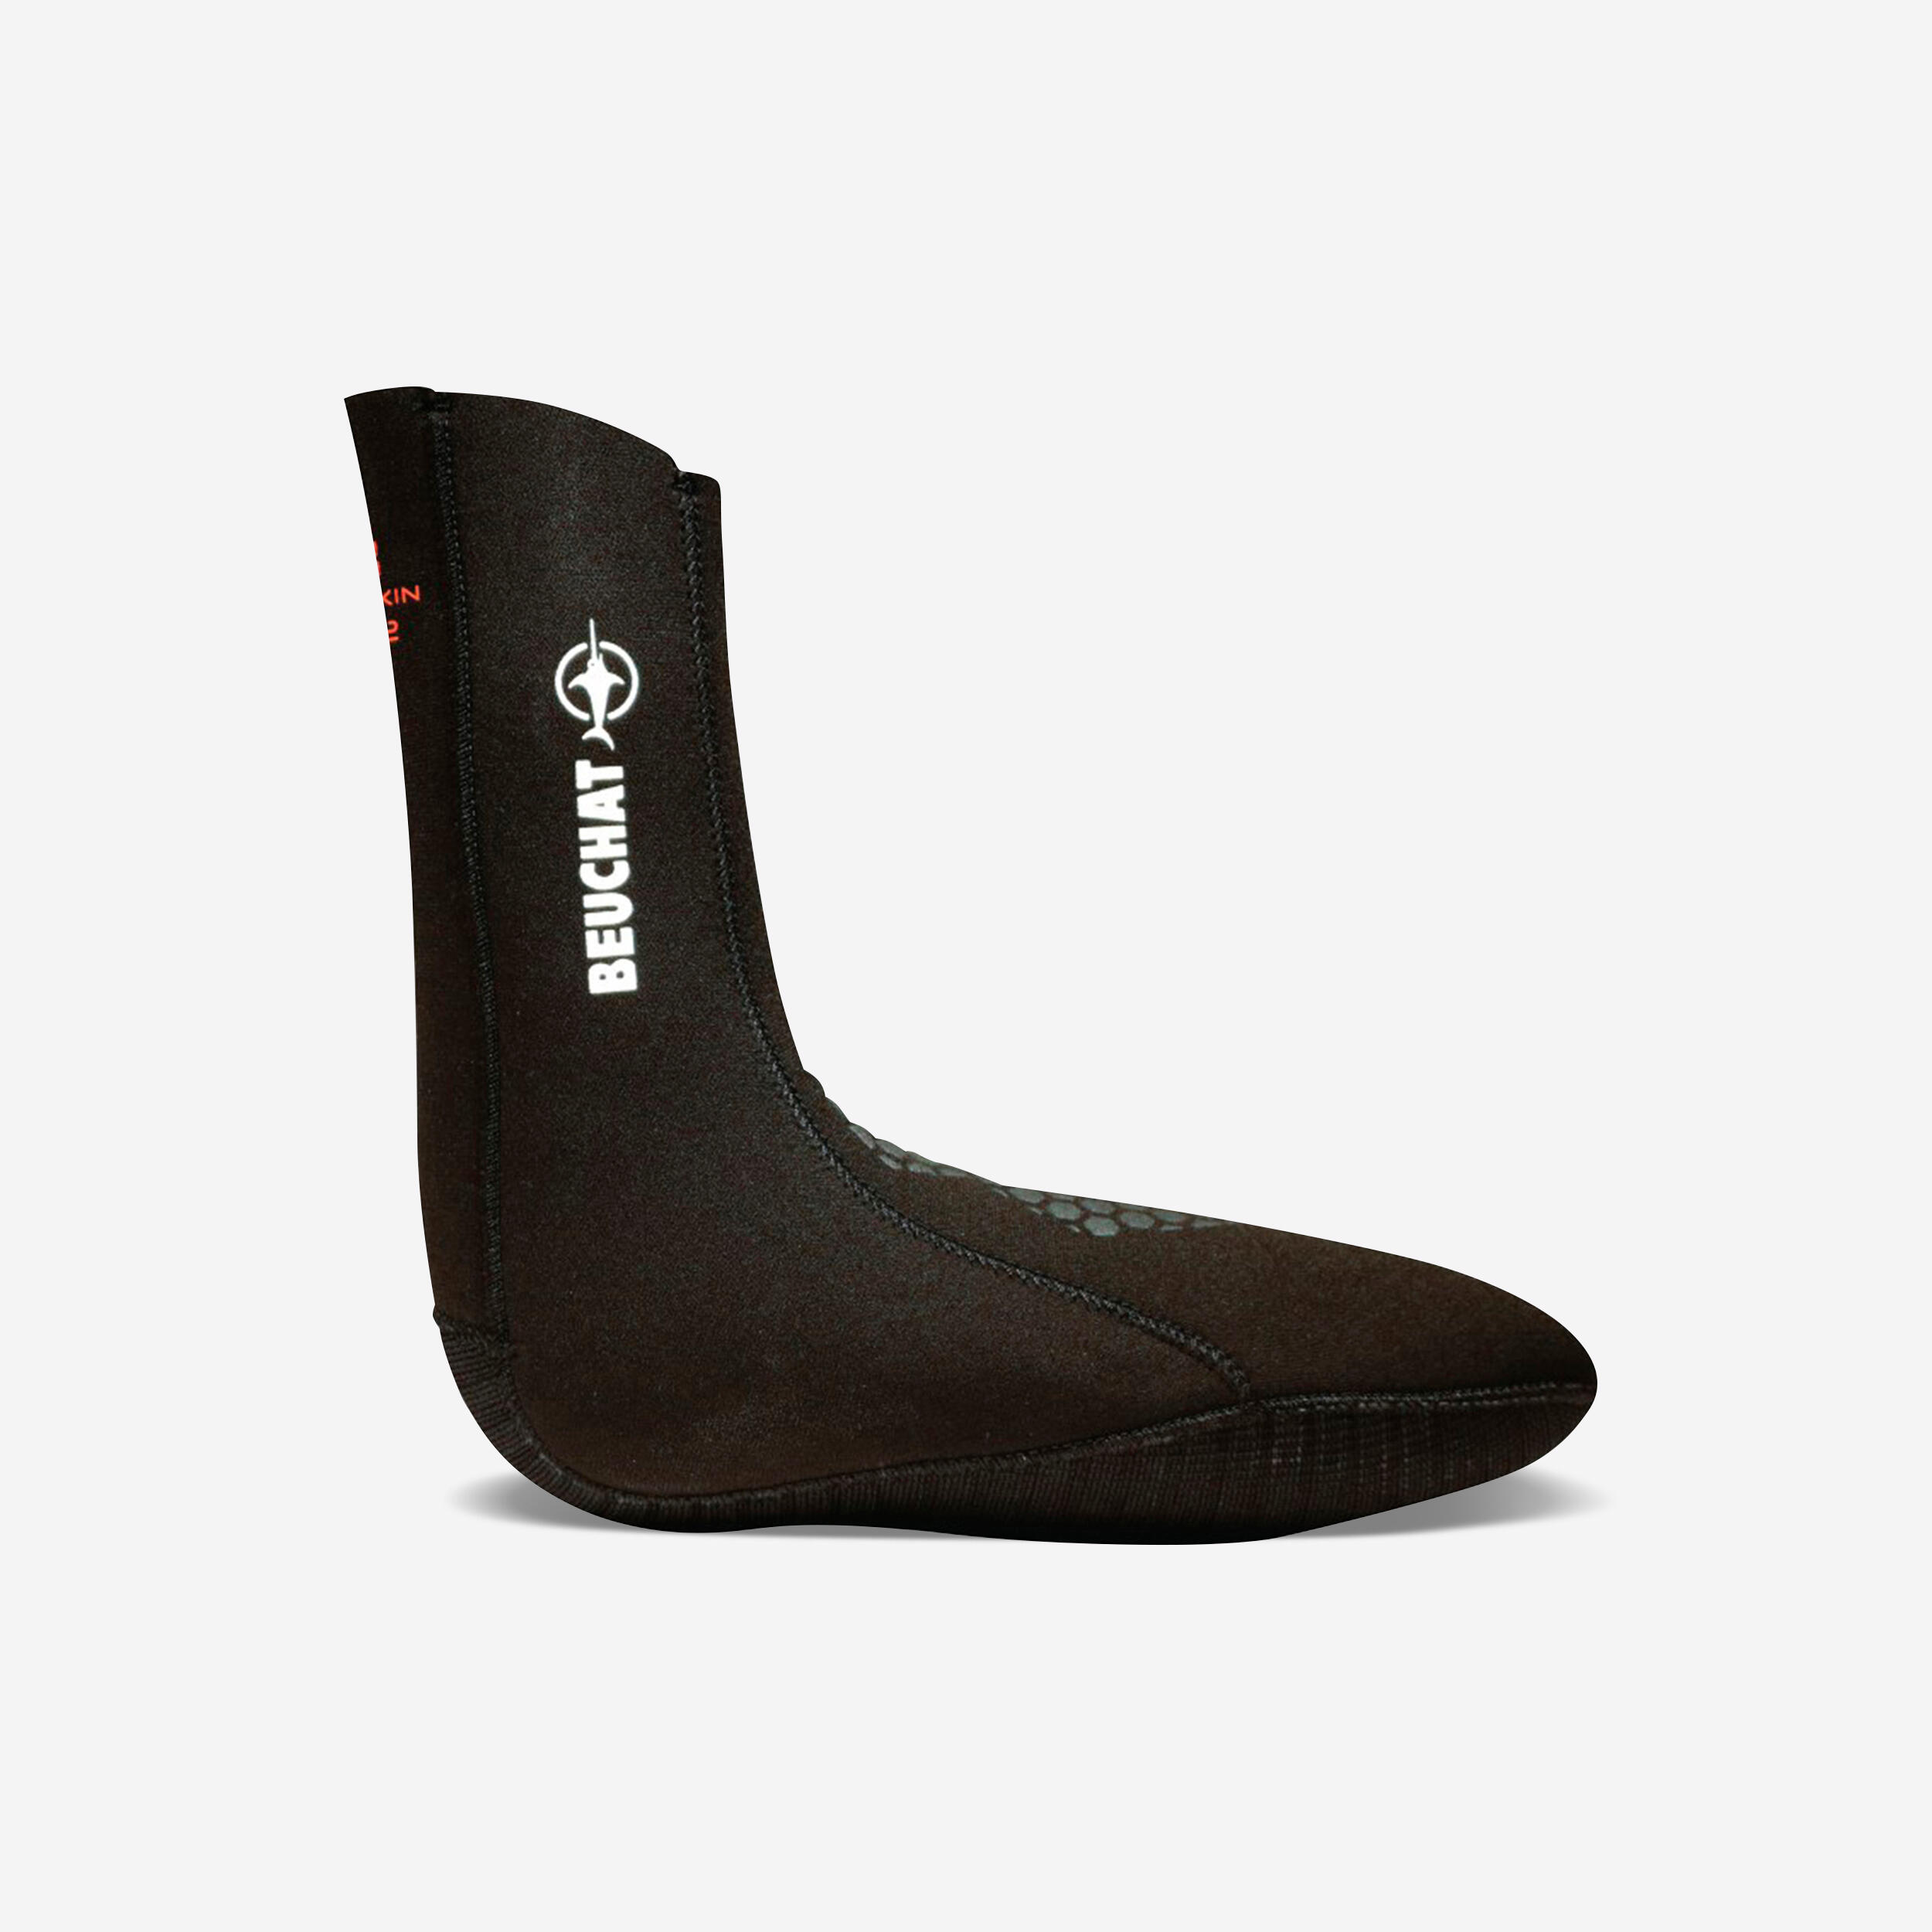 BEUCHAT SIROCCO ELITE SMOOTH 3 MM SOCKS FOR UNDERWATER SPEARFISHING